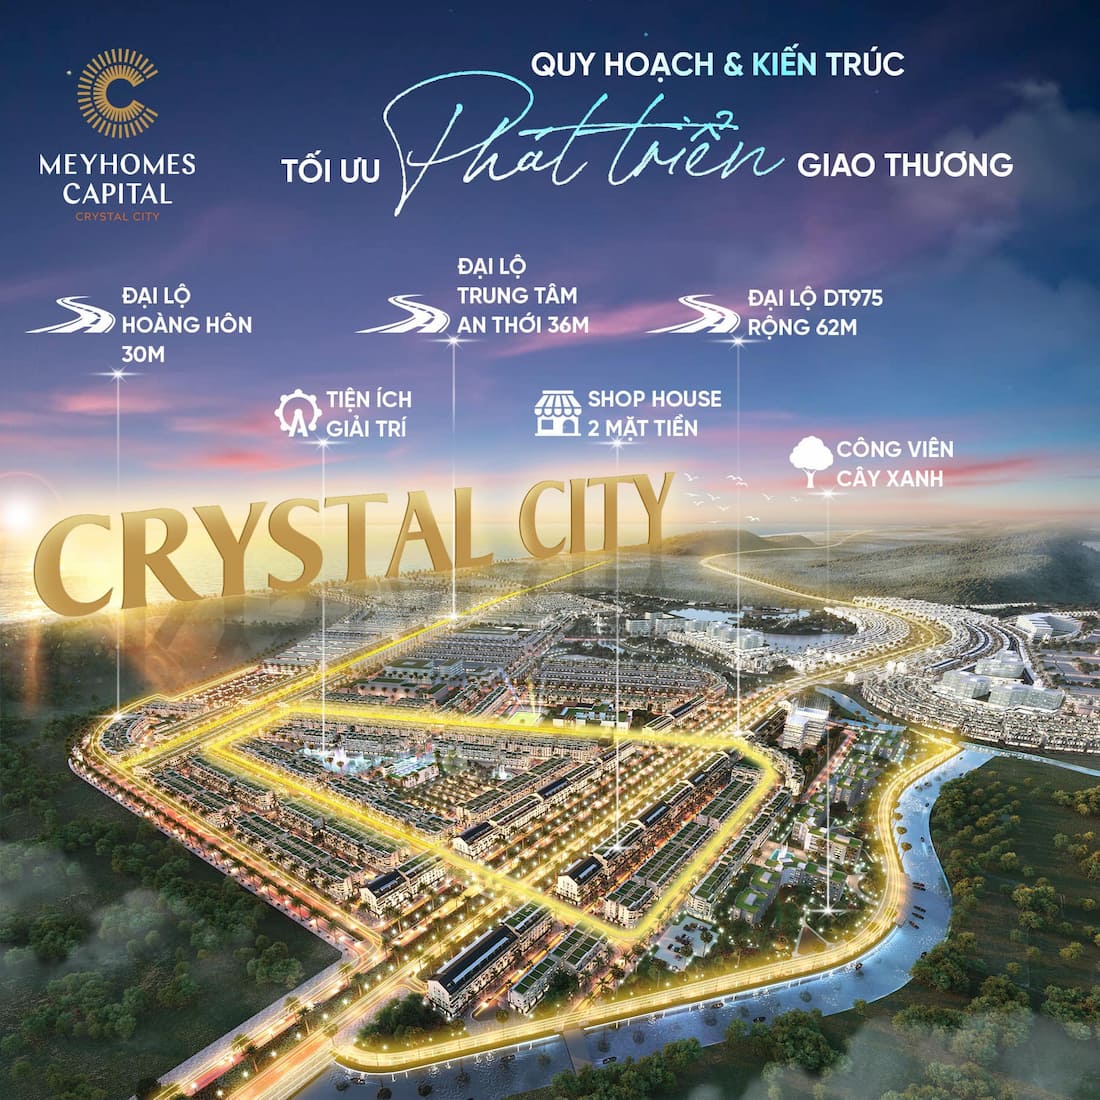 Crystal City at Meyhomes Capital Phu Quoc